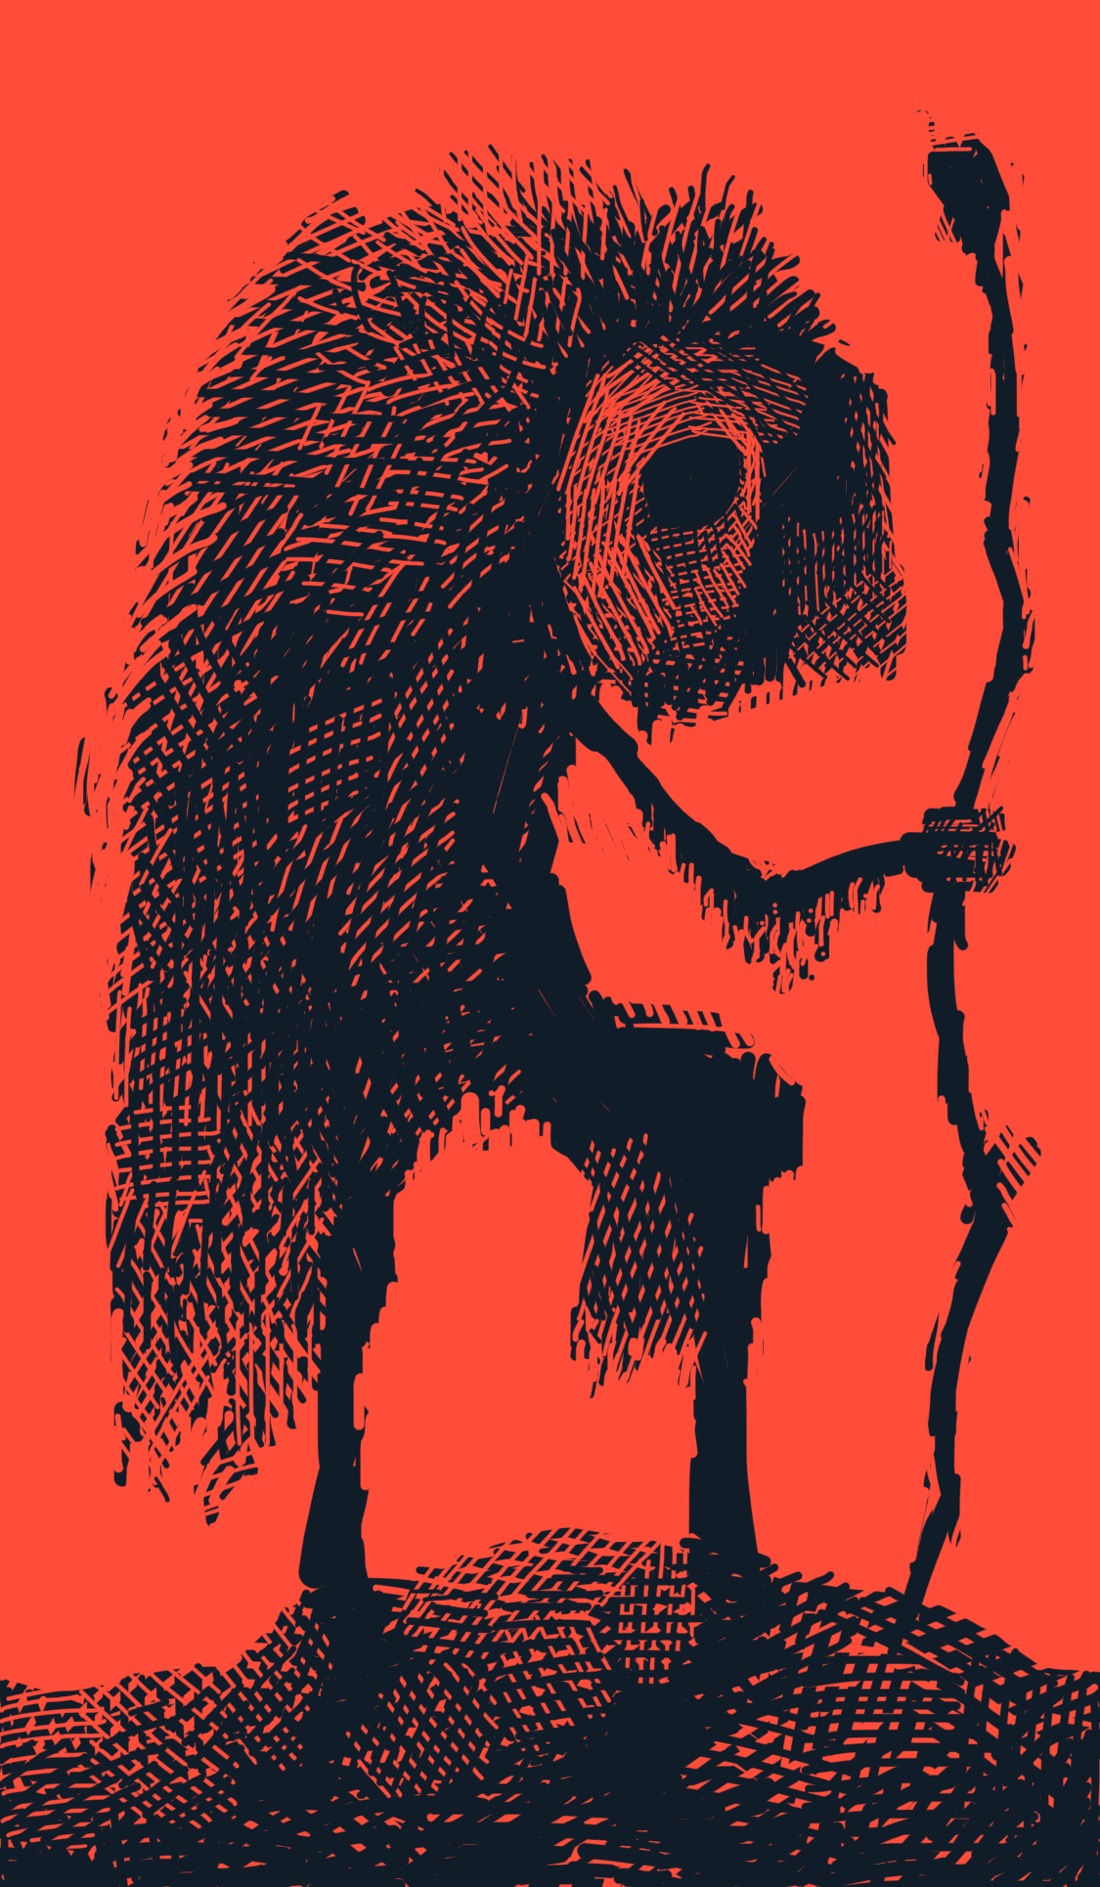 A thin, almost skeletal figure, wearing an expressionless mask with no facial features except two empty eyeholes, stands on a small, barren mound, holding a crooked stick. The figure is also wearing a heavy fur cloak piled on its back, giving it a hunchbacked appearance, as well as some ragged clothing.